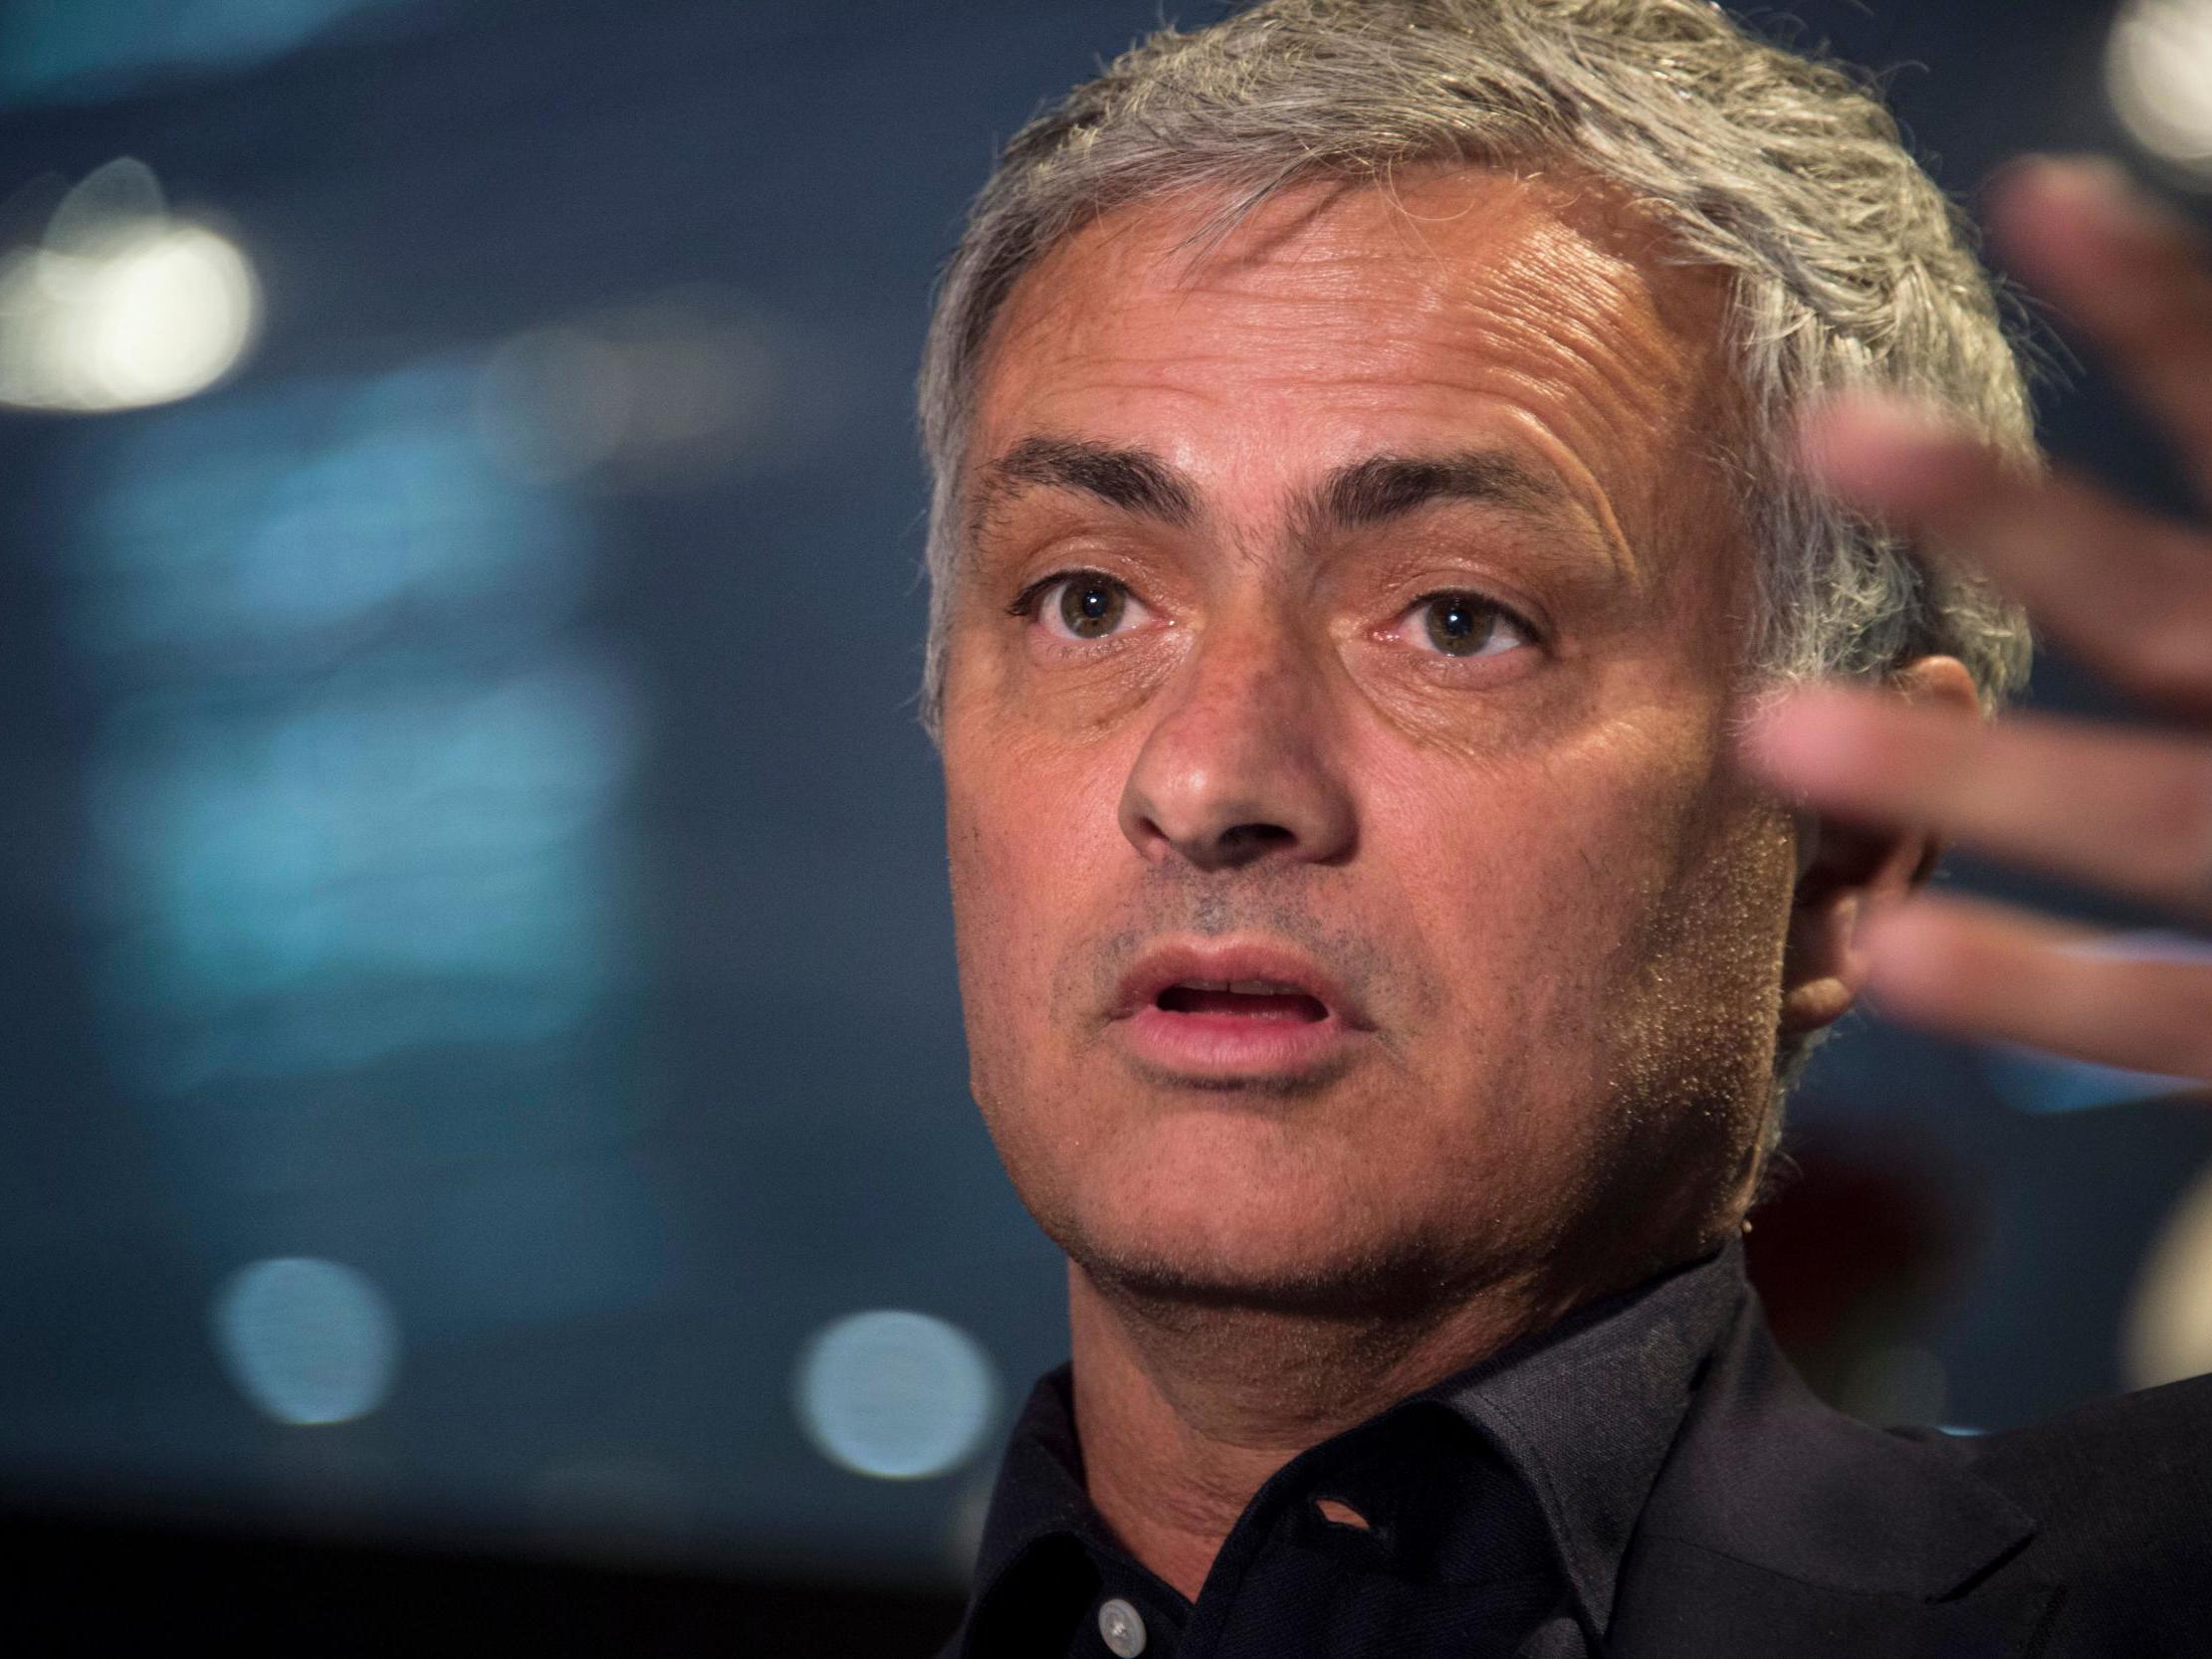 Jose Mourinho opens up on Bayern Munich speculation and whether he would accept offer from German champions